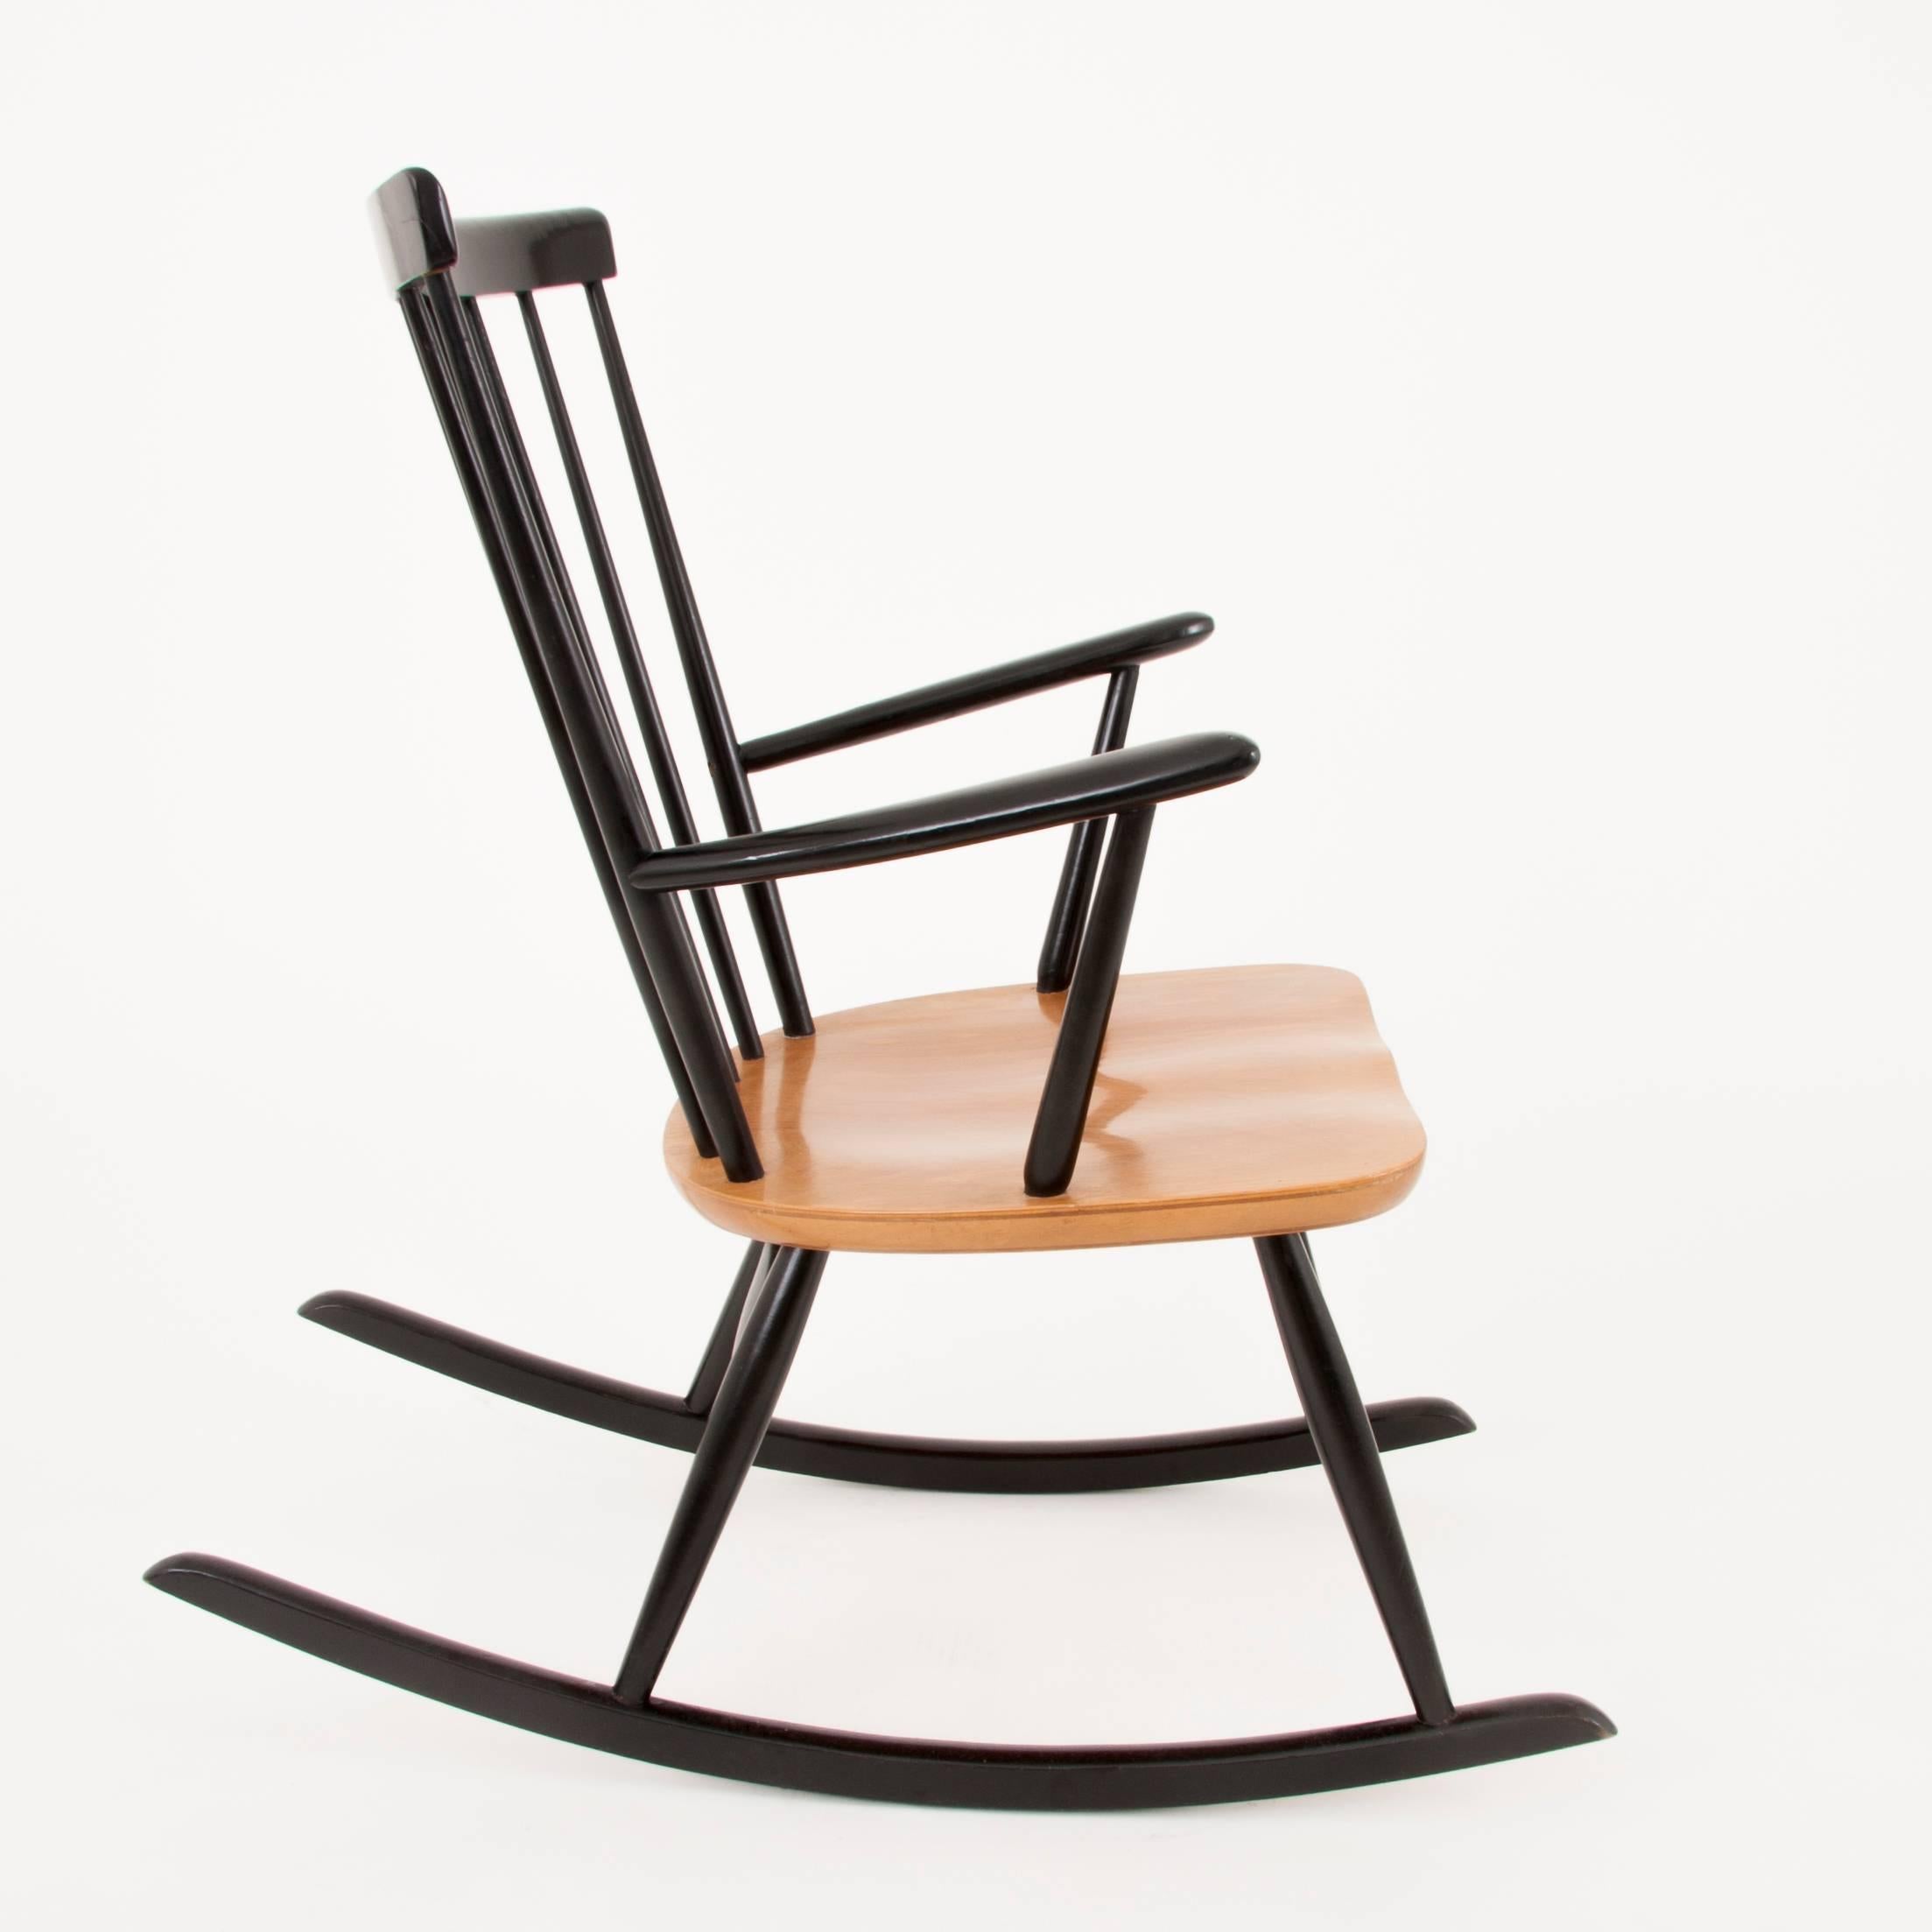 A beautiful modernist rocking chair from the late 1950s, made of beechwood and partly black lacquered. Designed by Roland Rainer, executed by Thonet, Austria. In excellent condition.